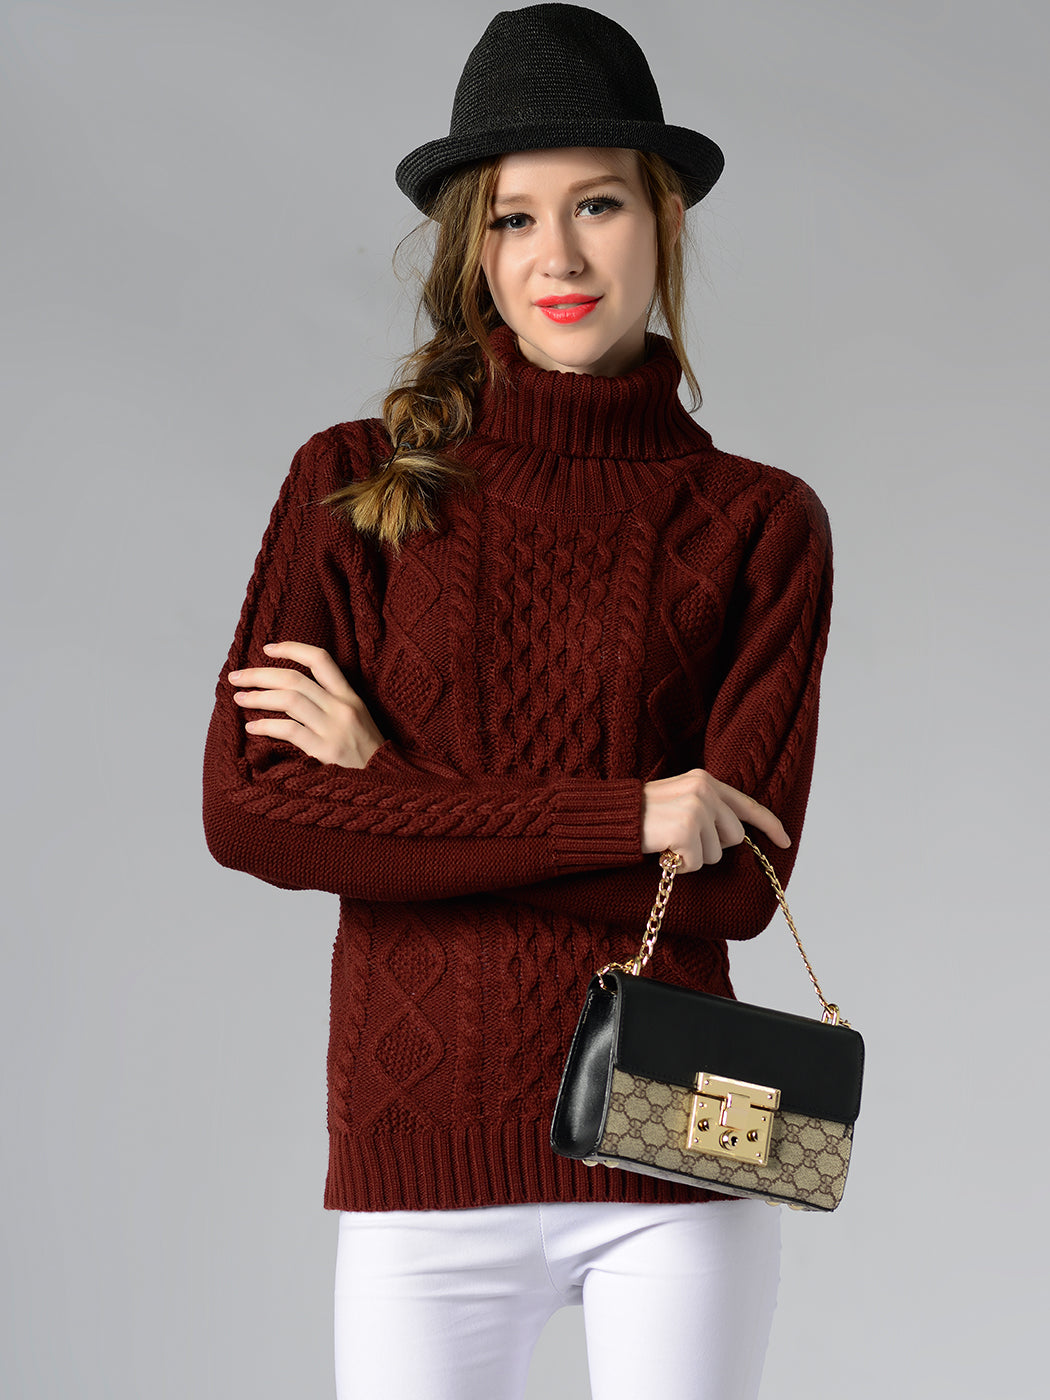 Cable Knit Turtle Neck Stretch Long Sleeve Pullover Sweater